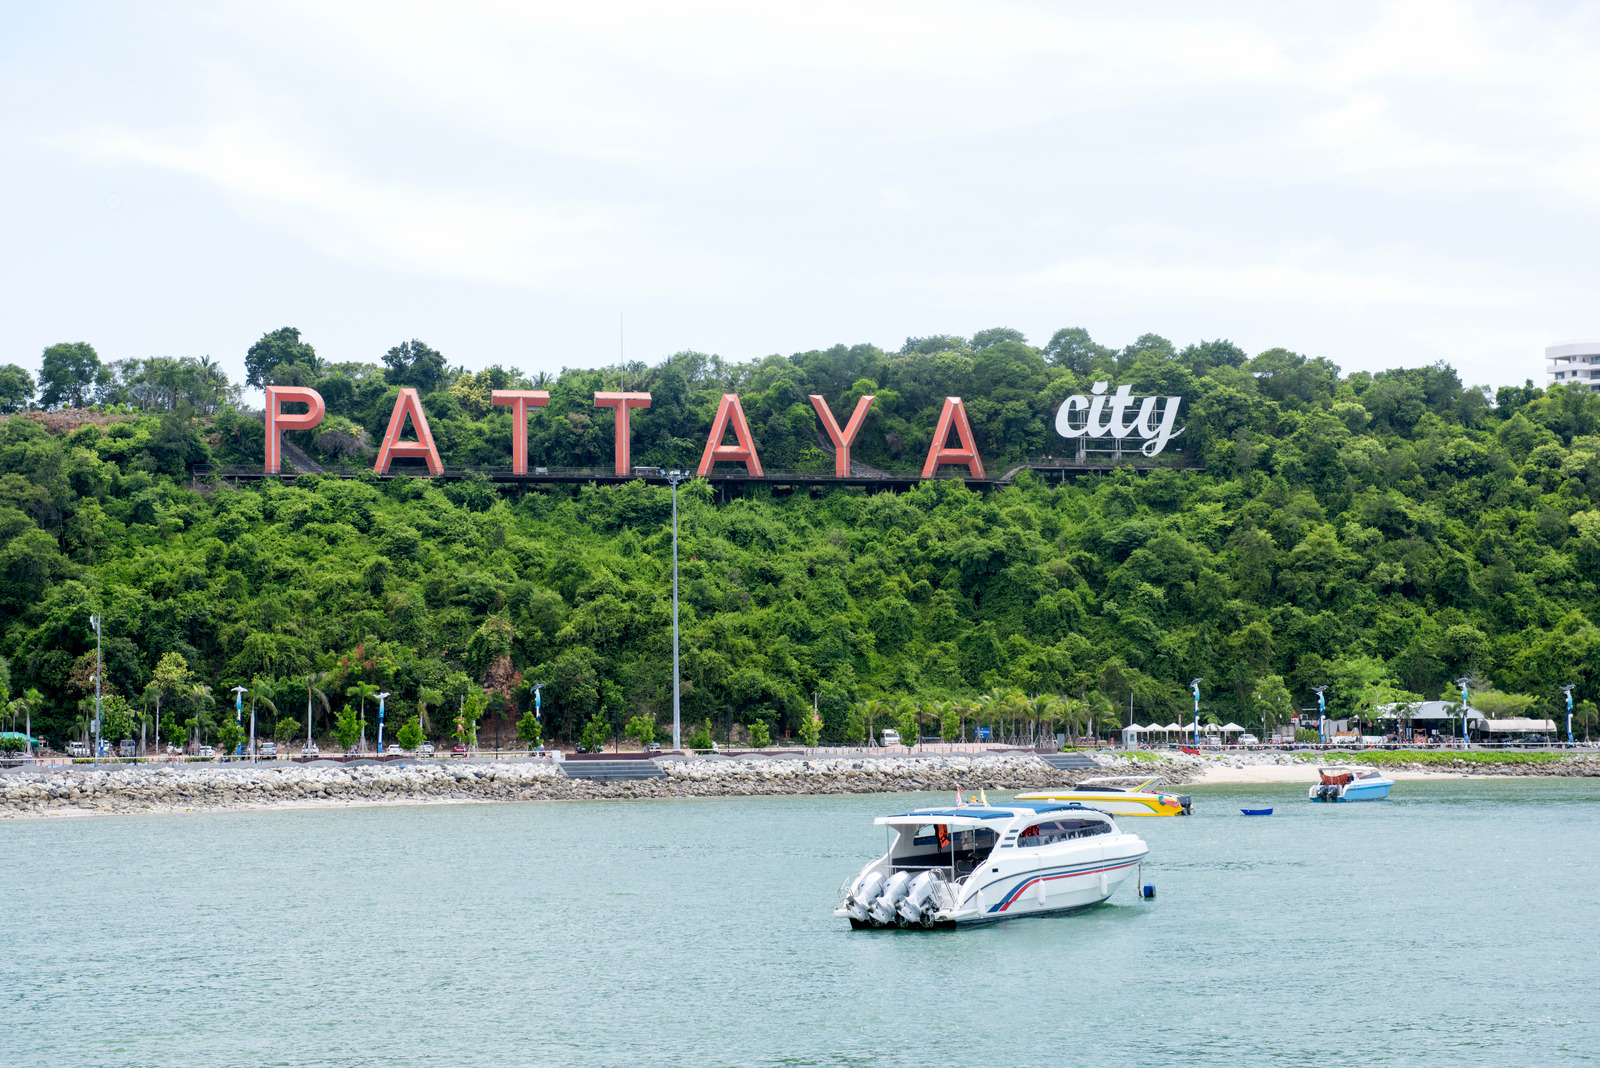 Pattaya bay with the city in large letters